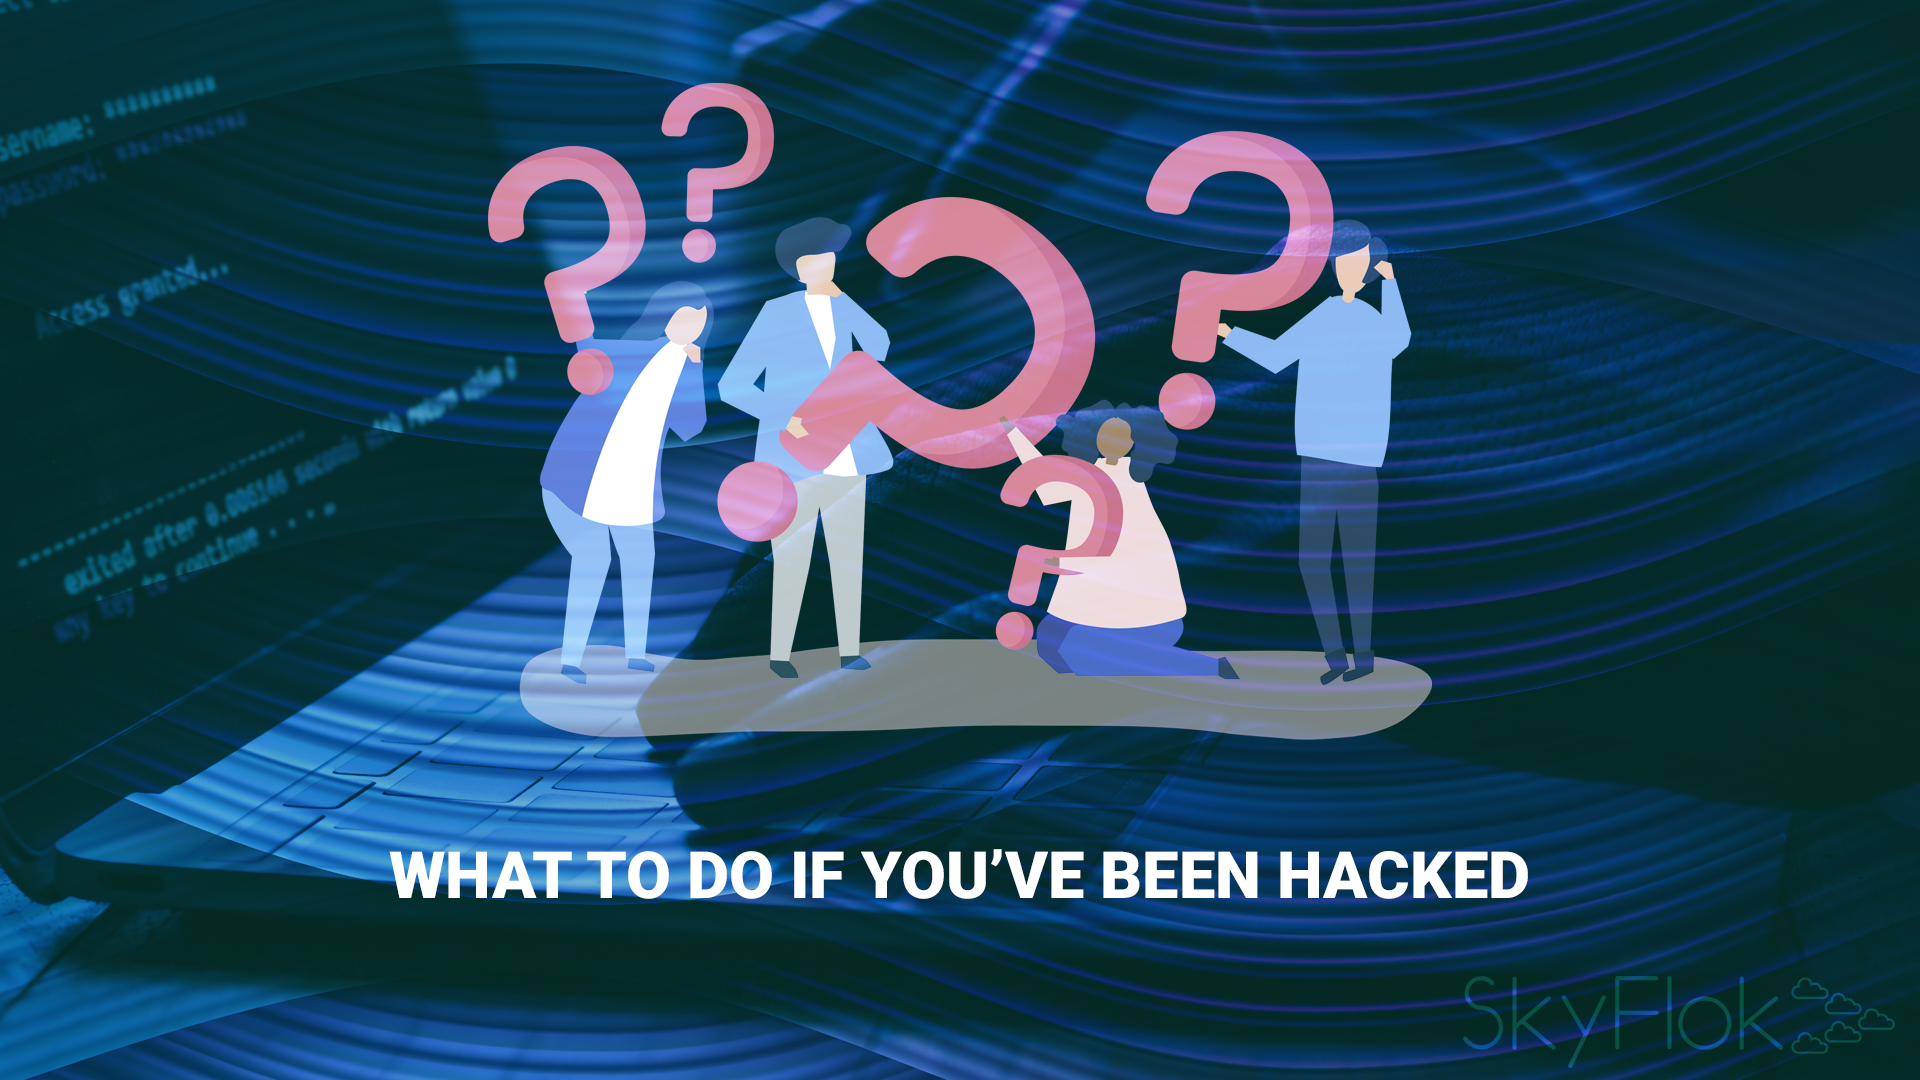 What To Do If You’ve Been Hacked